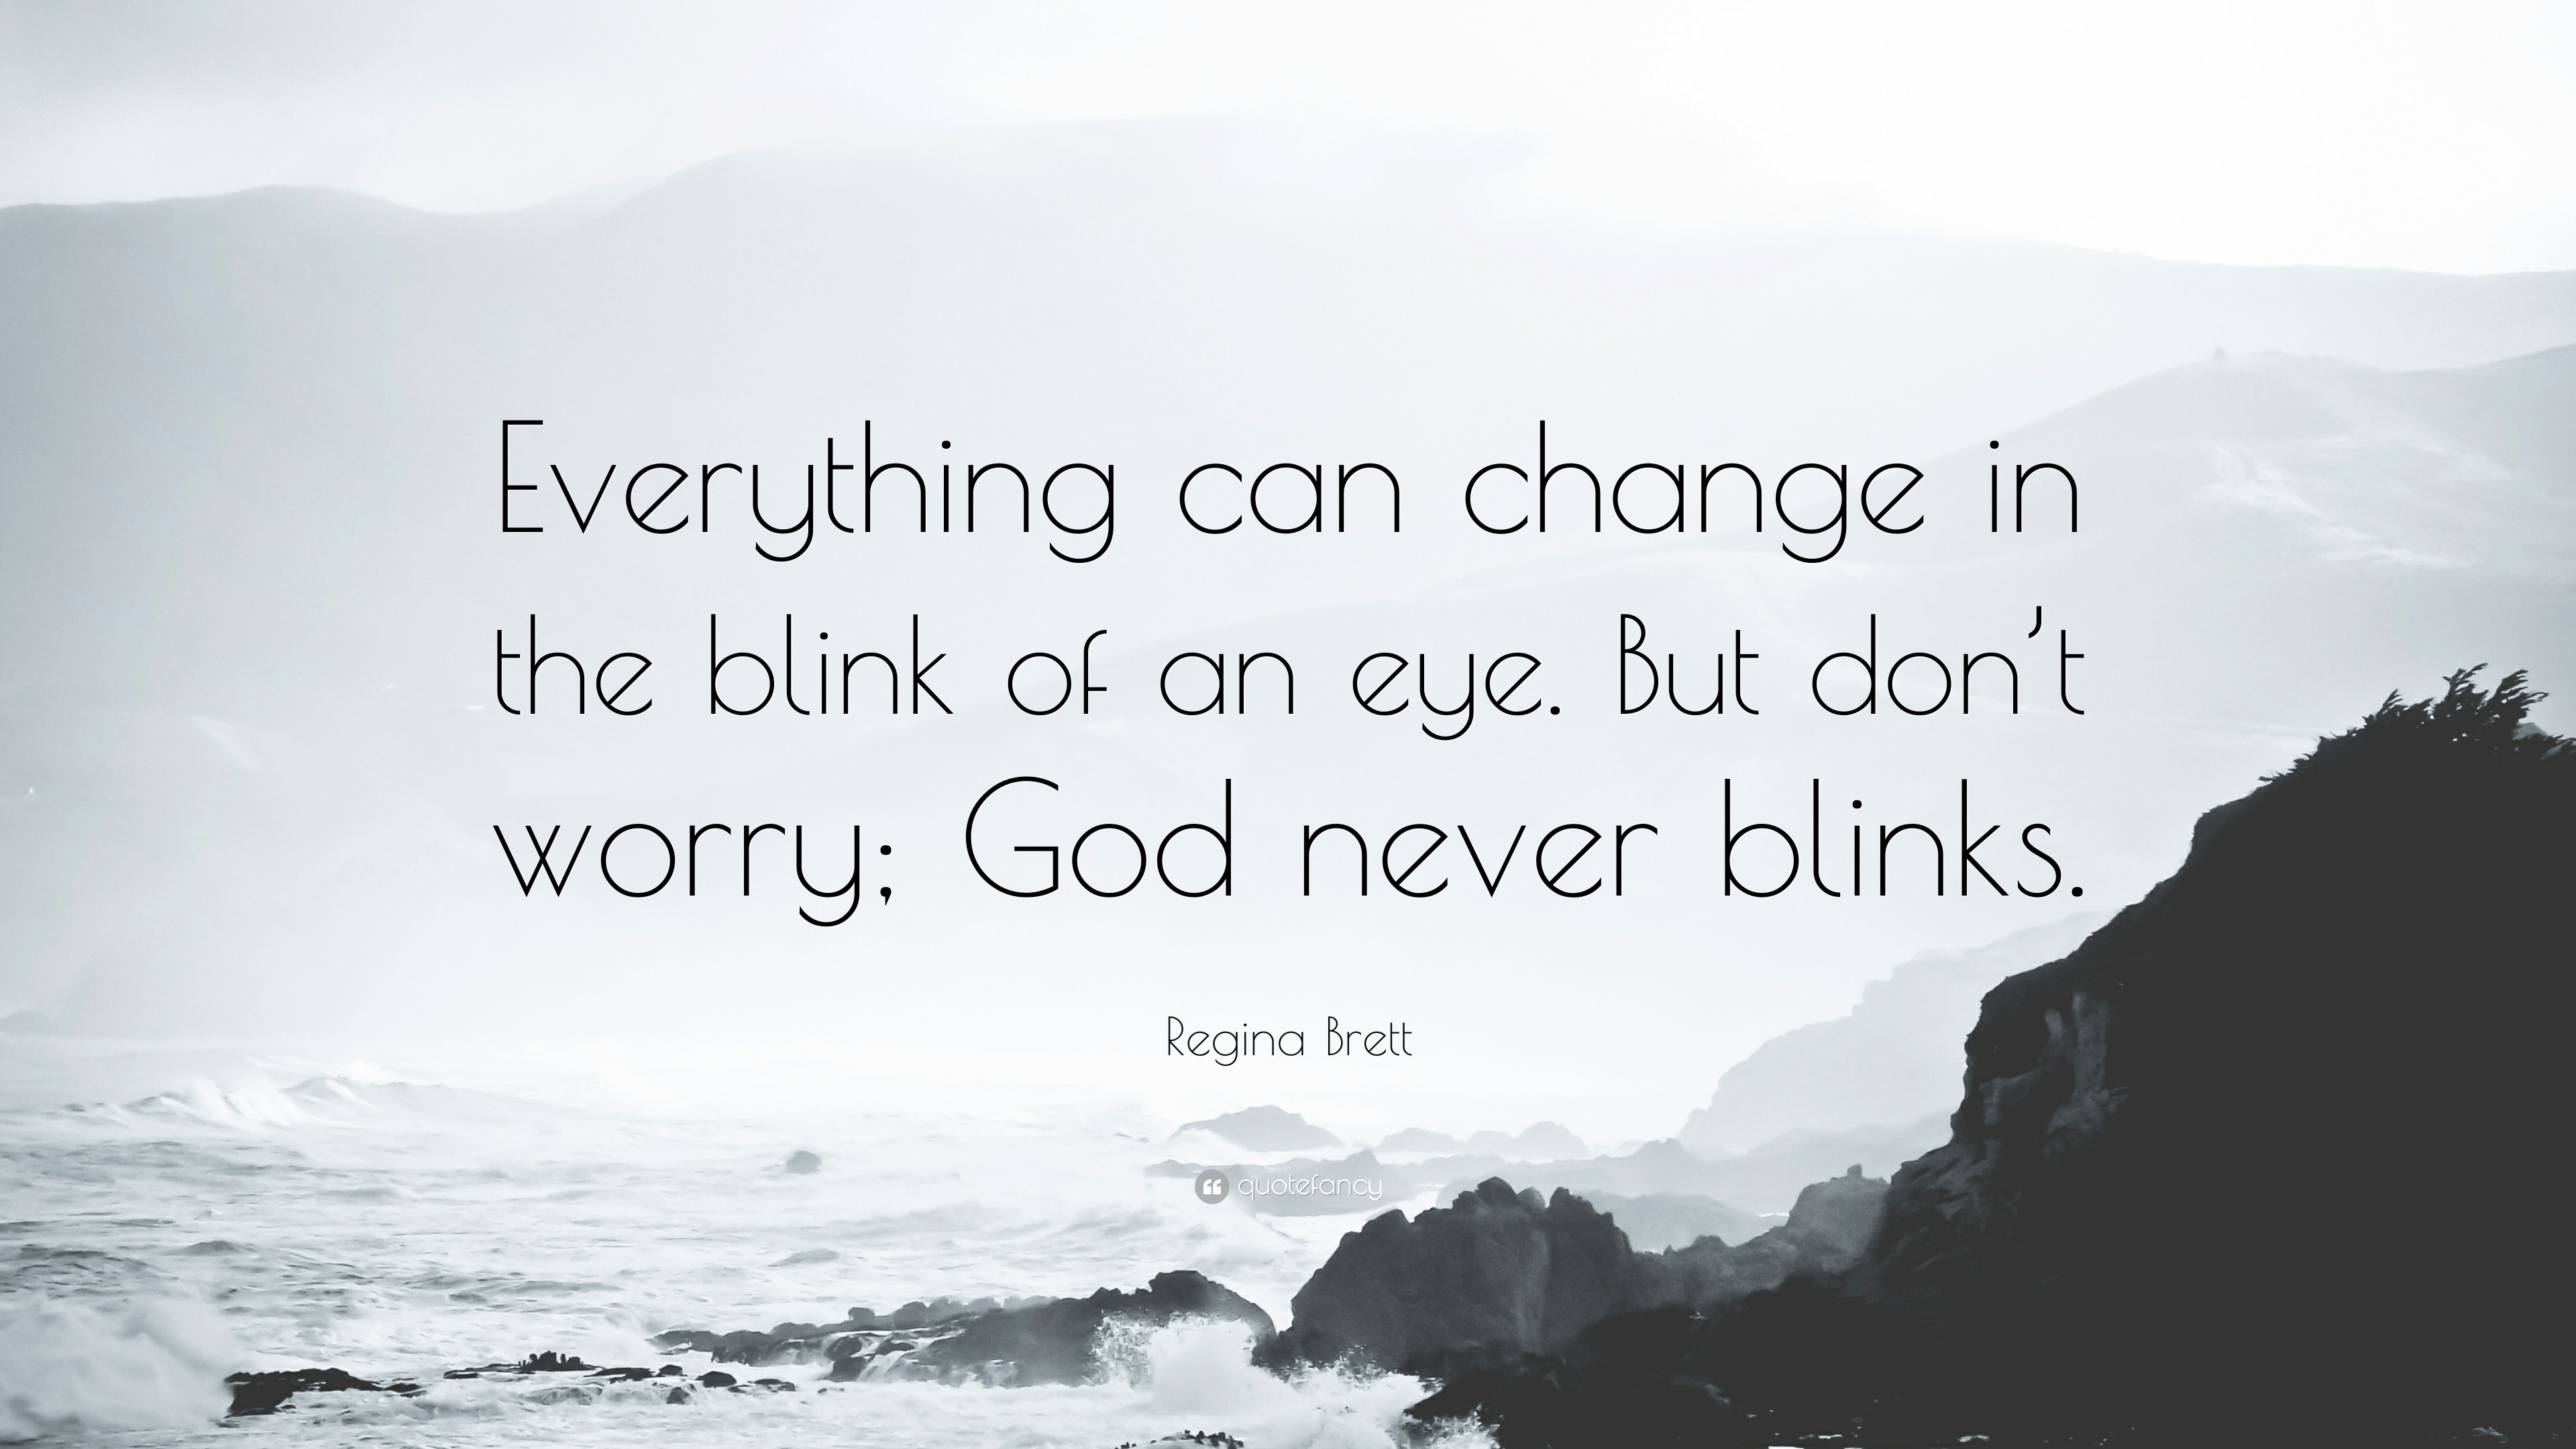 Regina Brett Quote: “Everything can change in the blink of an eye. But